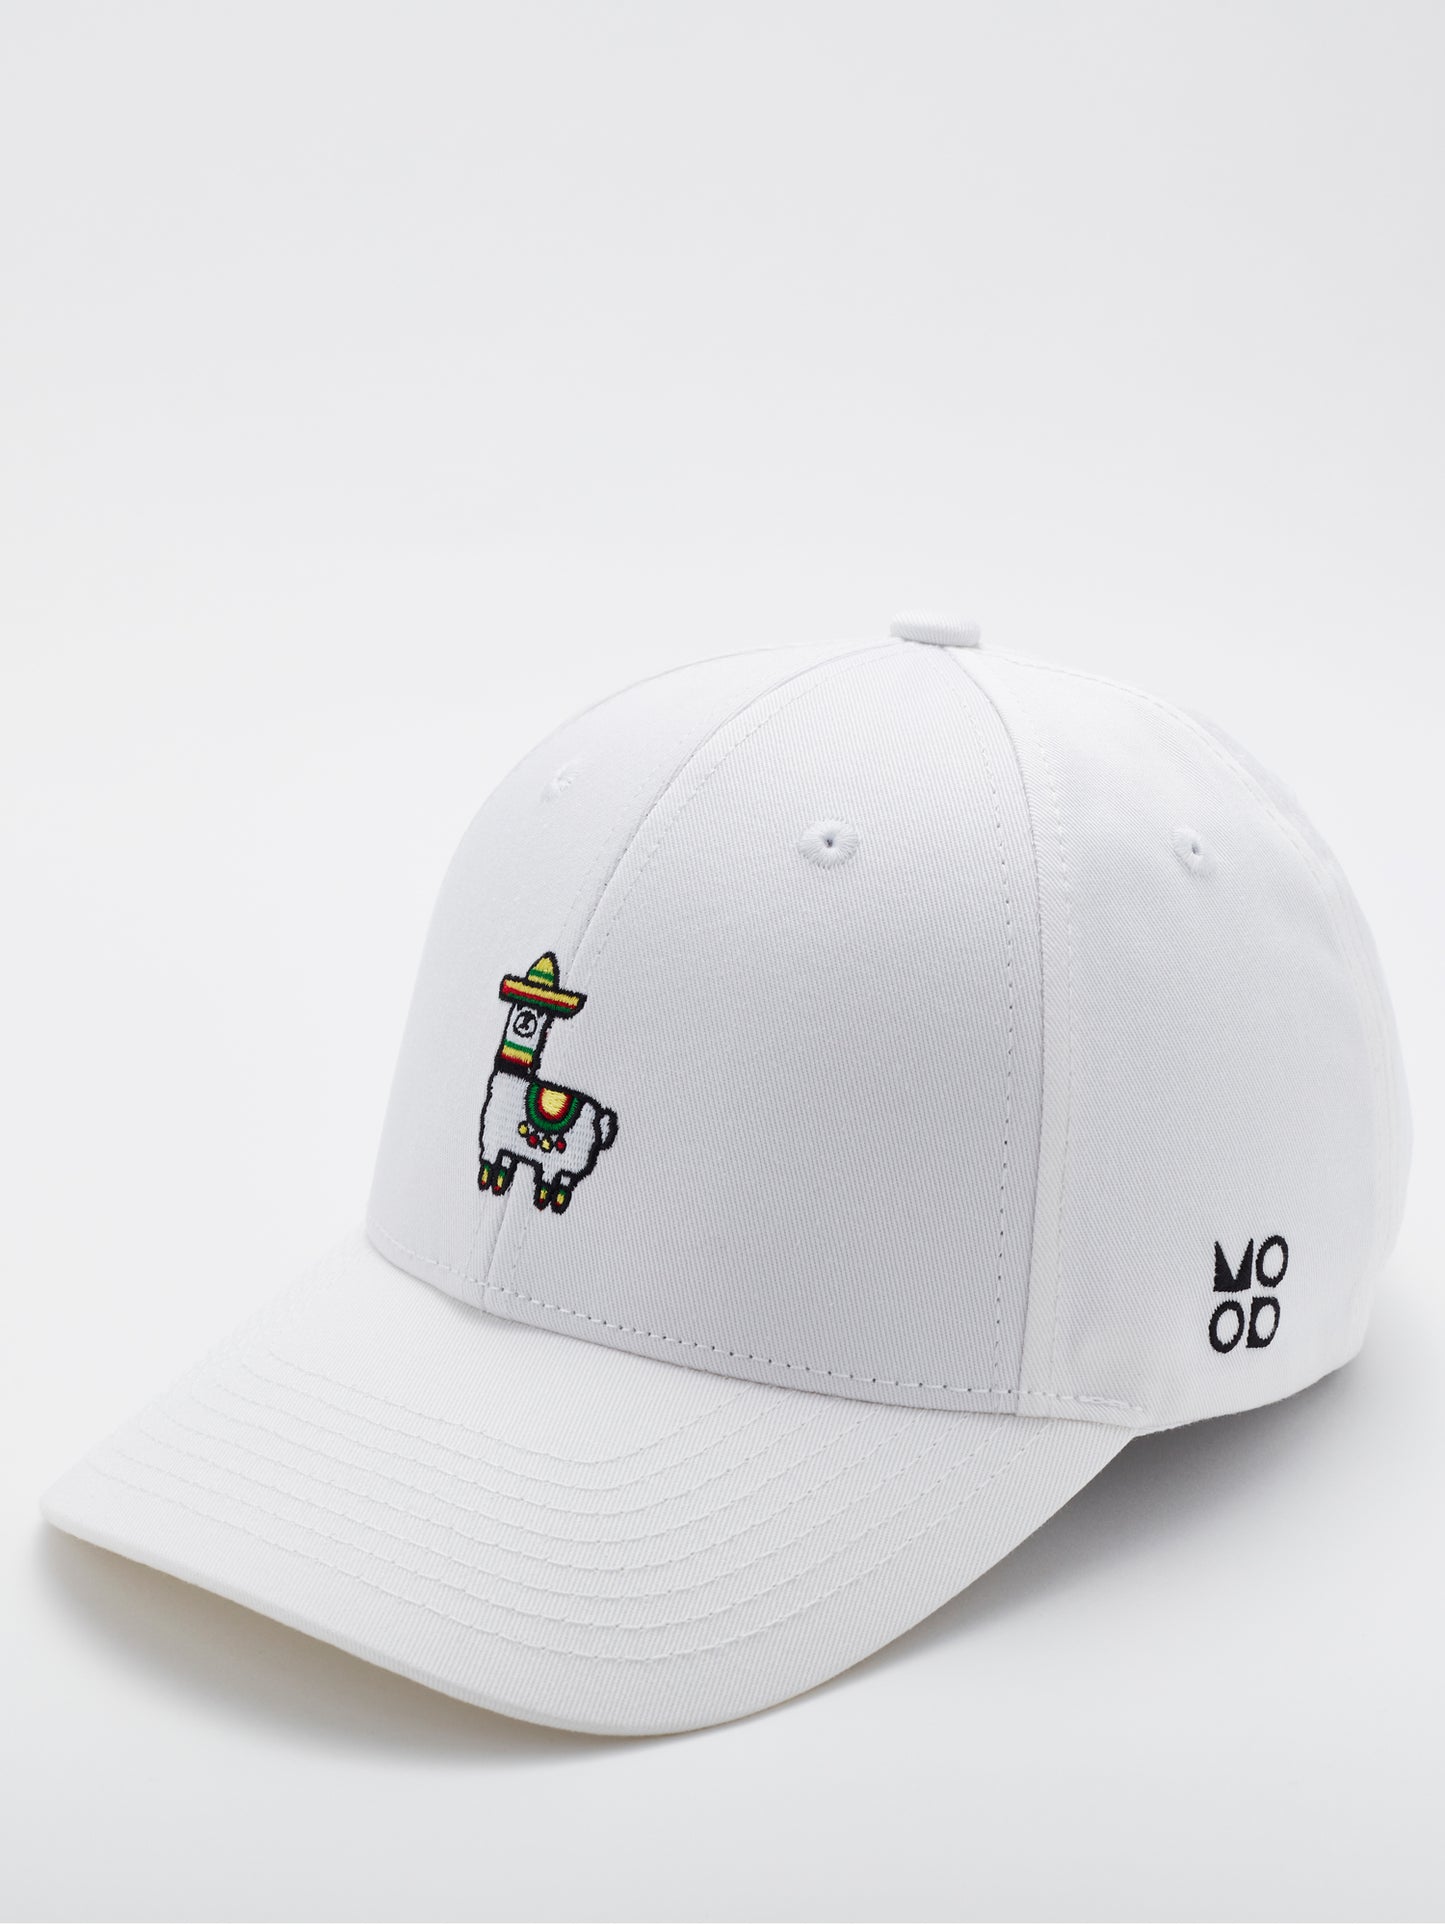 MOOD Brand - Mexillama baseball cap in white color - side view